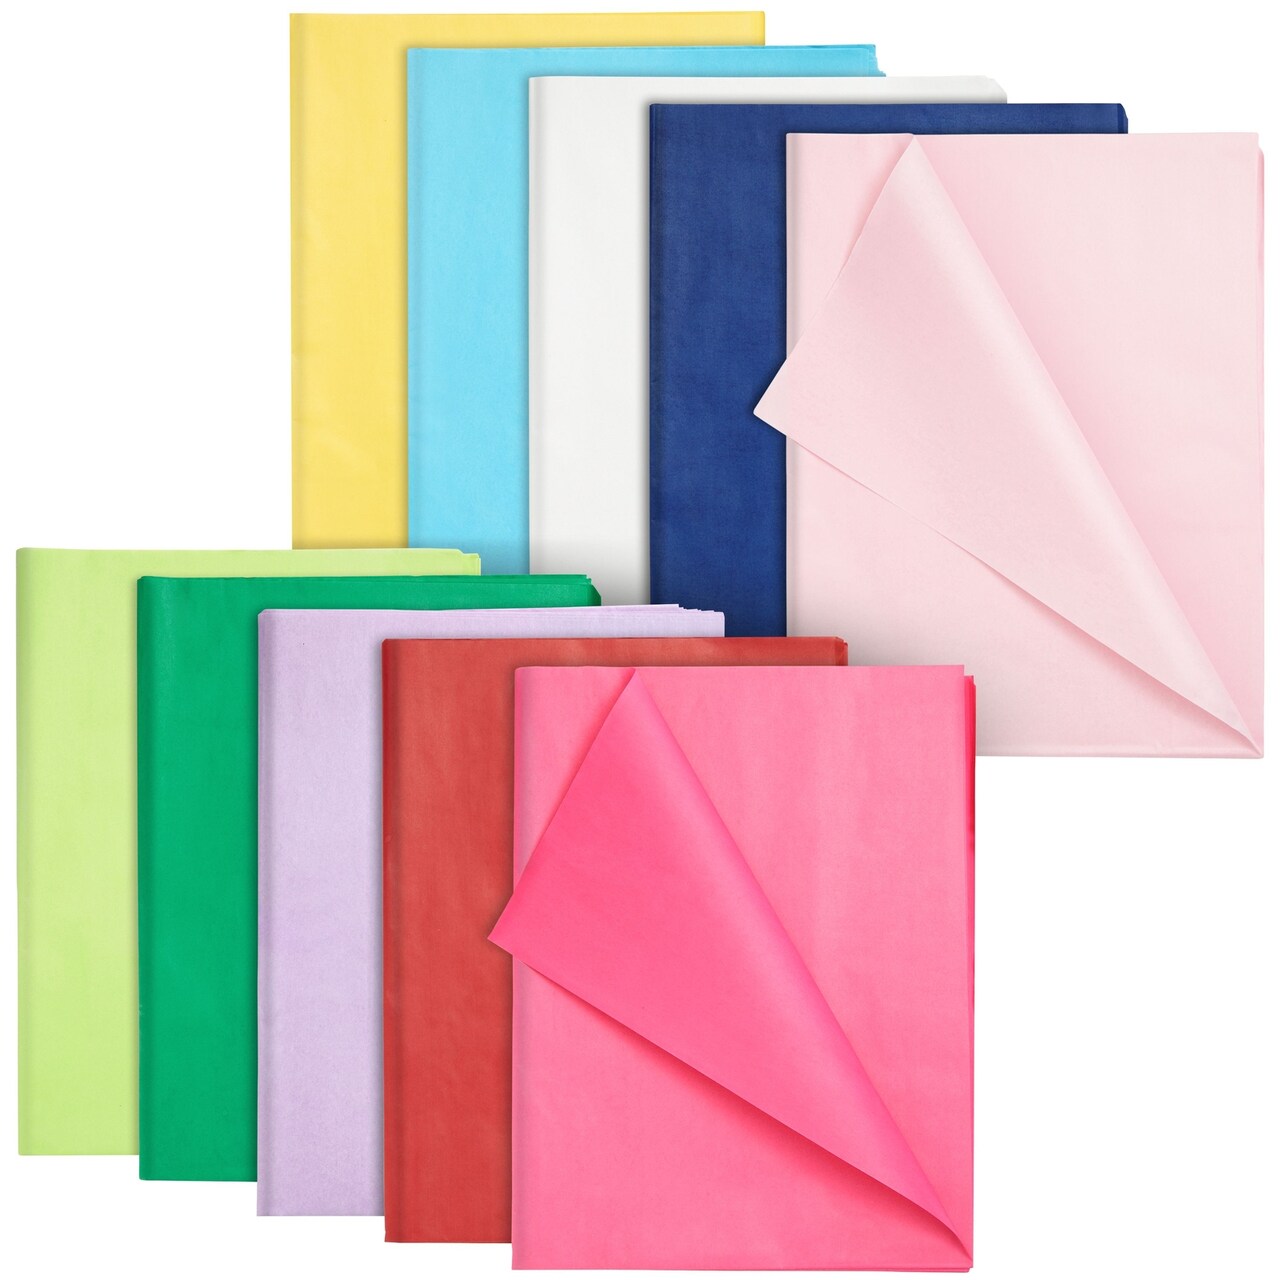 120 Sheets Tissue Paper for Gift Bags, Gift Wrapping, Crafts - Colorful  Tissue Paper for Packaging, Presents, Gift Wrapping Supplies (10 Colors,  26x20 In)